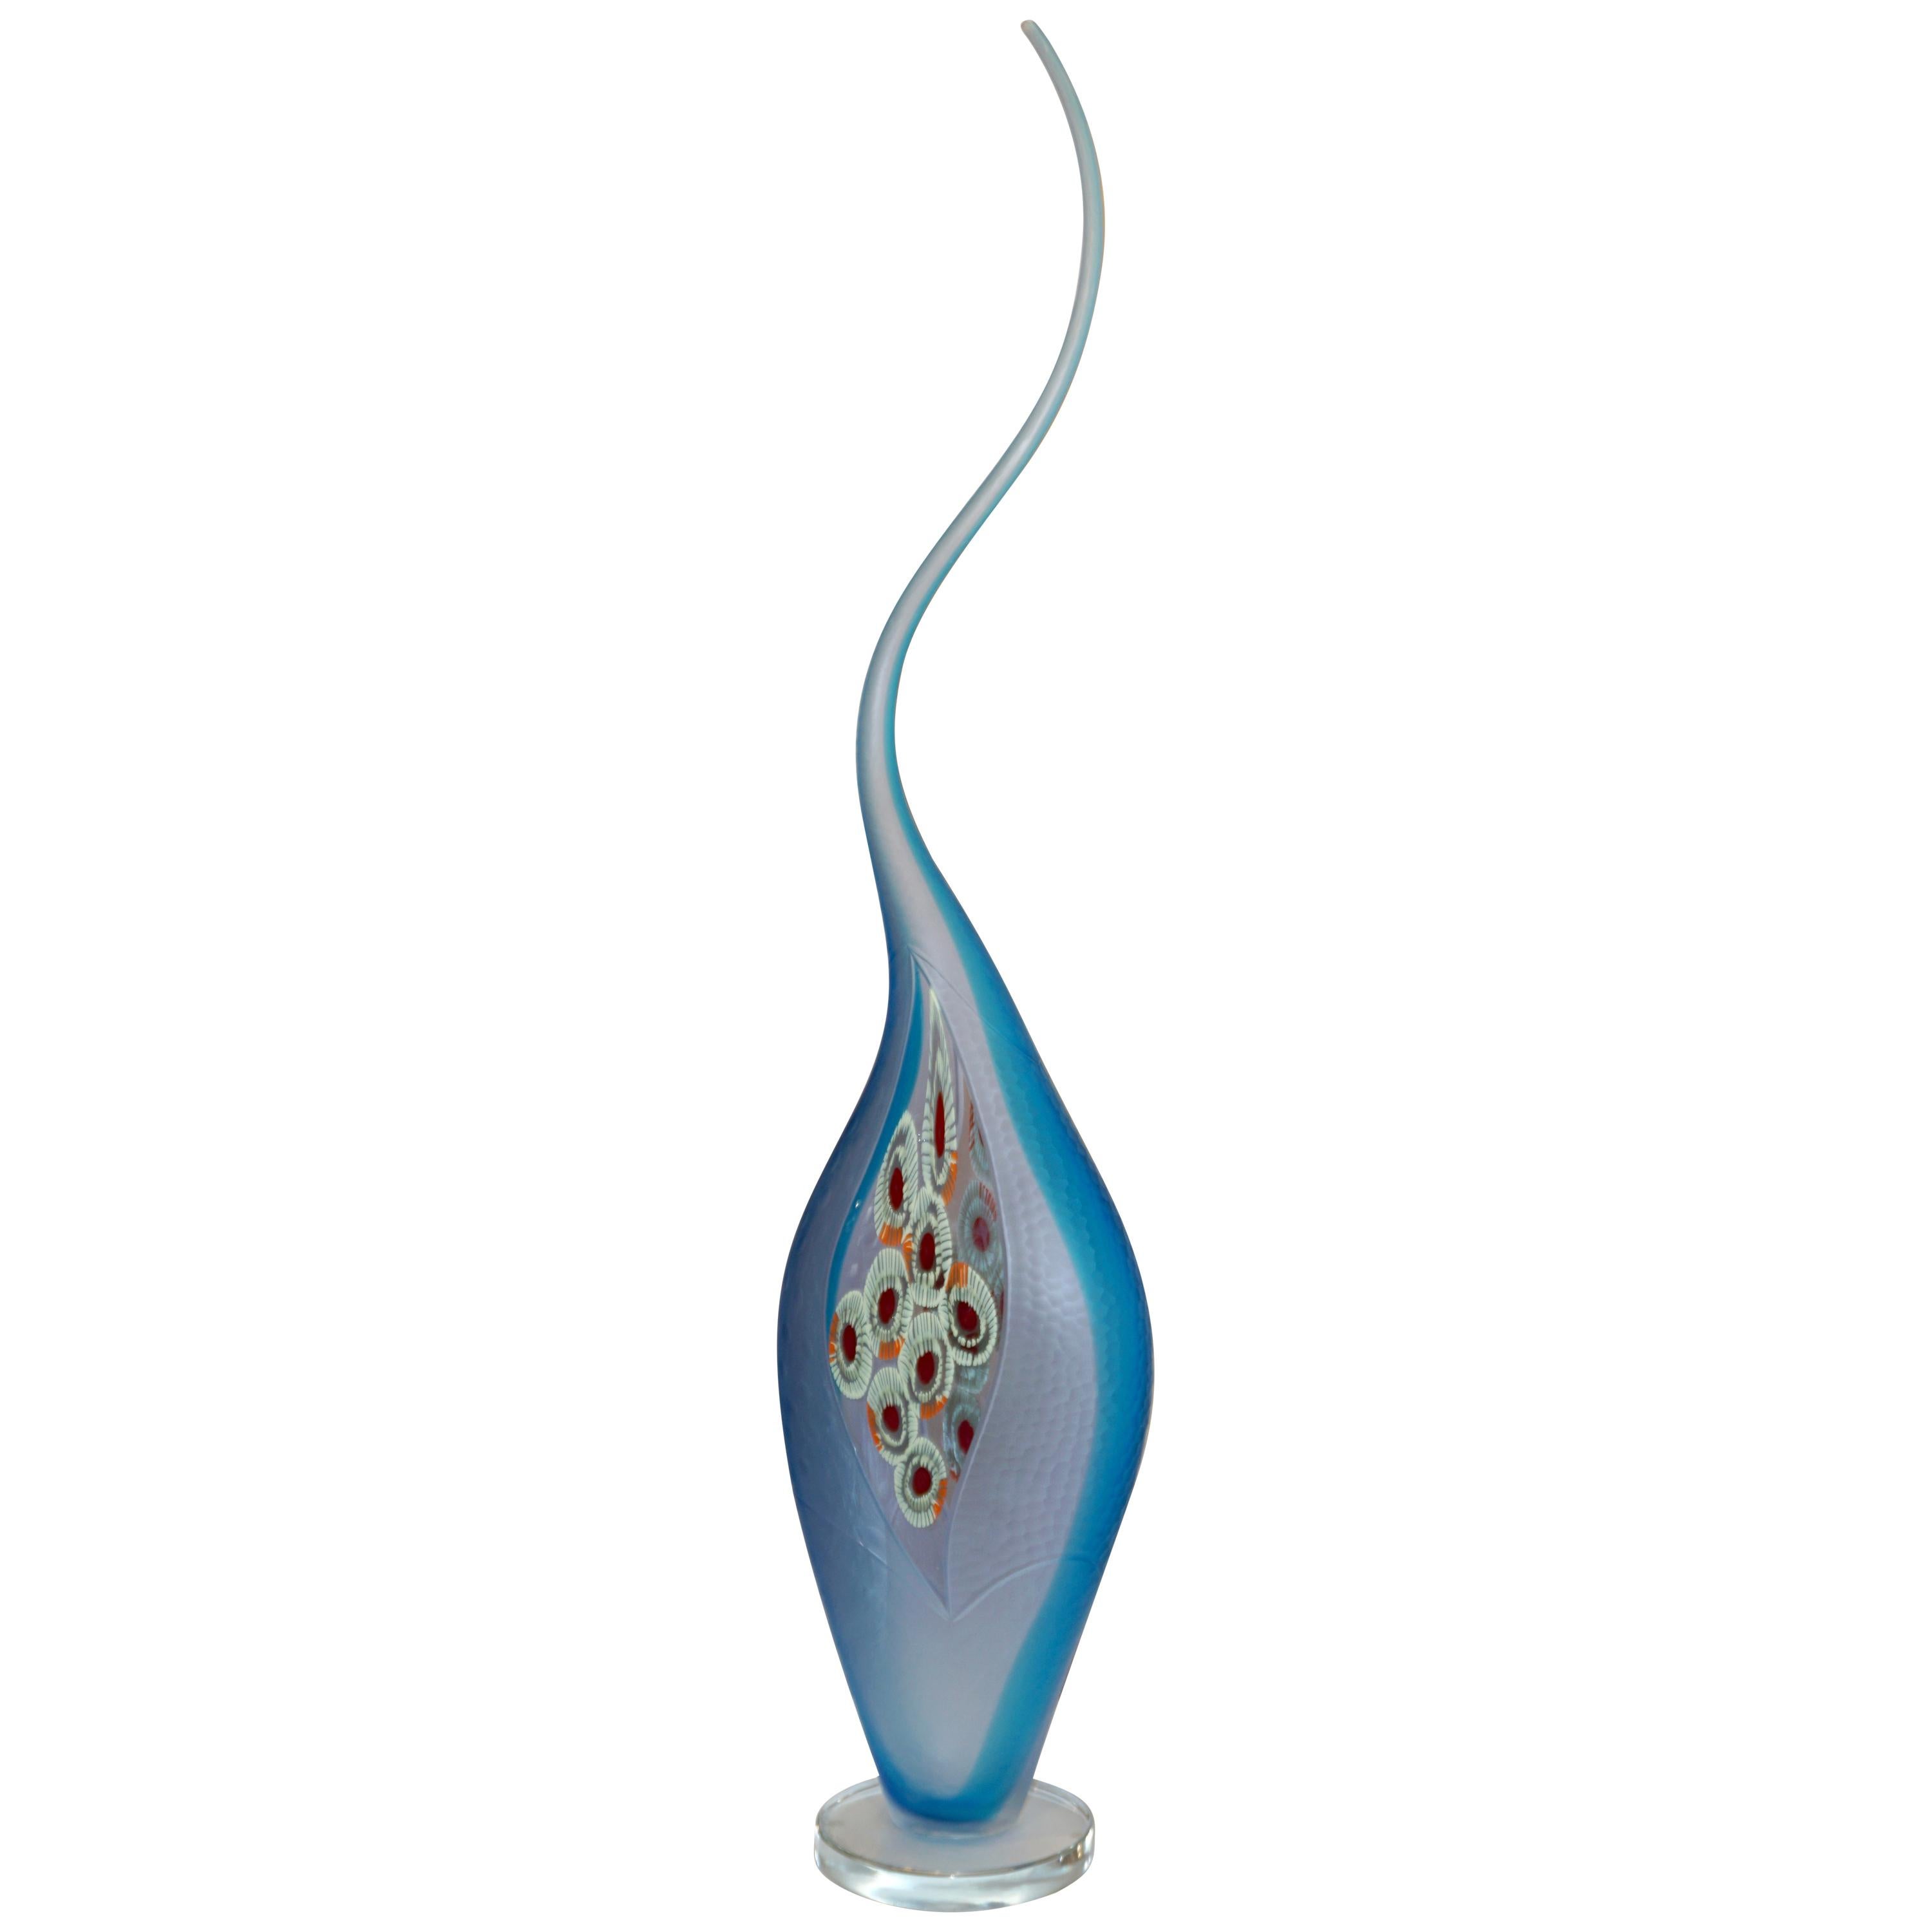 Dona Modern Art Glass Aqua Blue Sculpture Vase with Red and Yellow Murrine